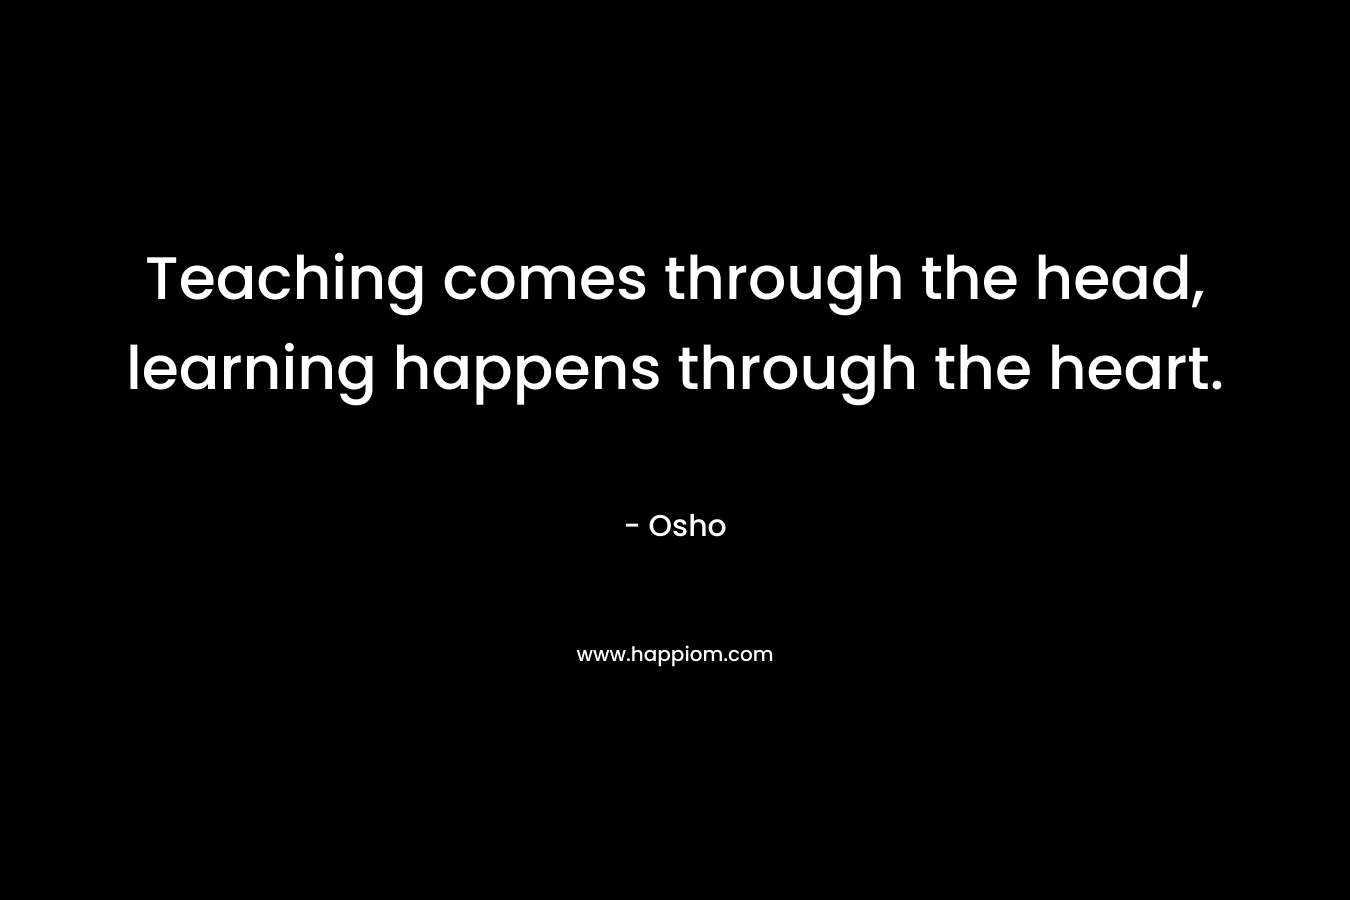 Teaching comes through the head, learning happens through the heart.